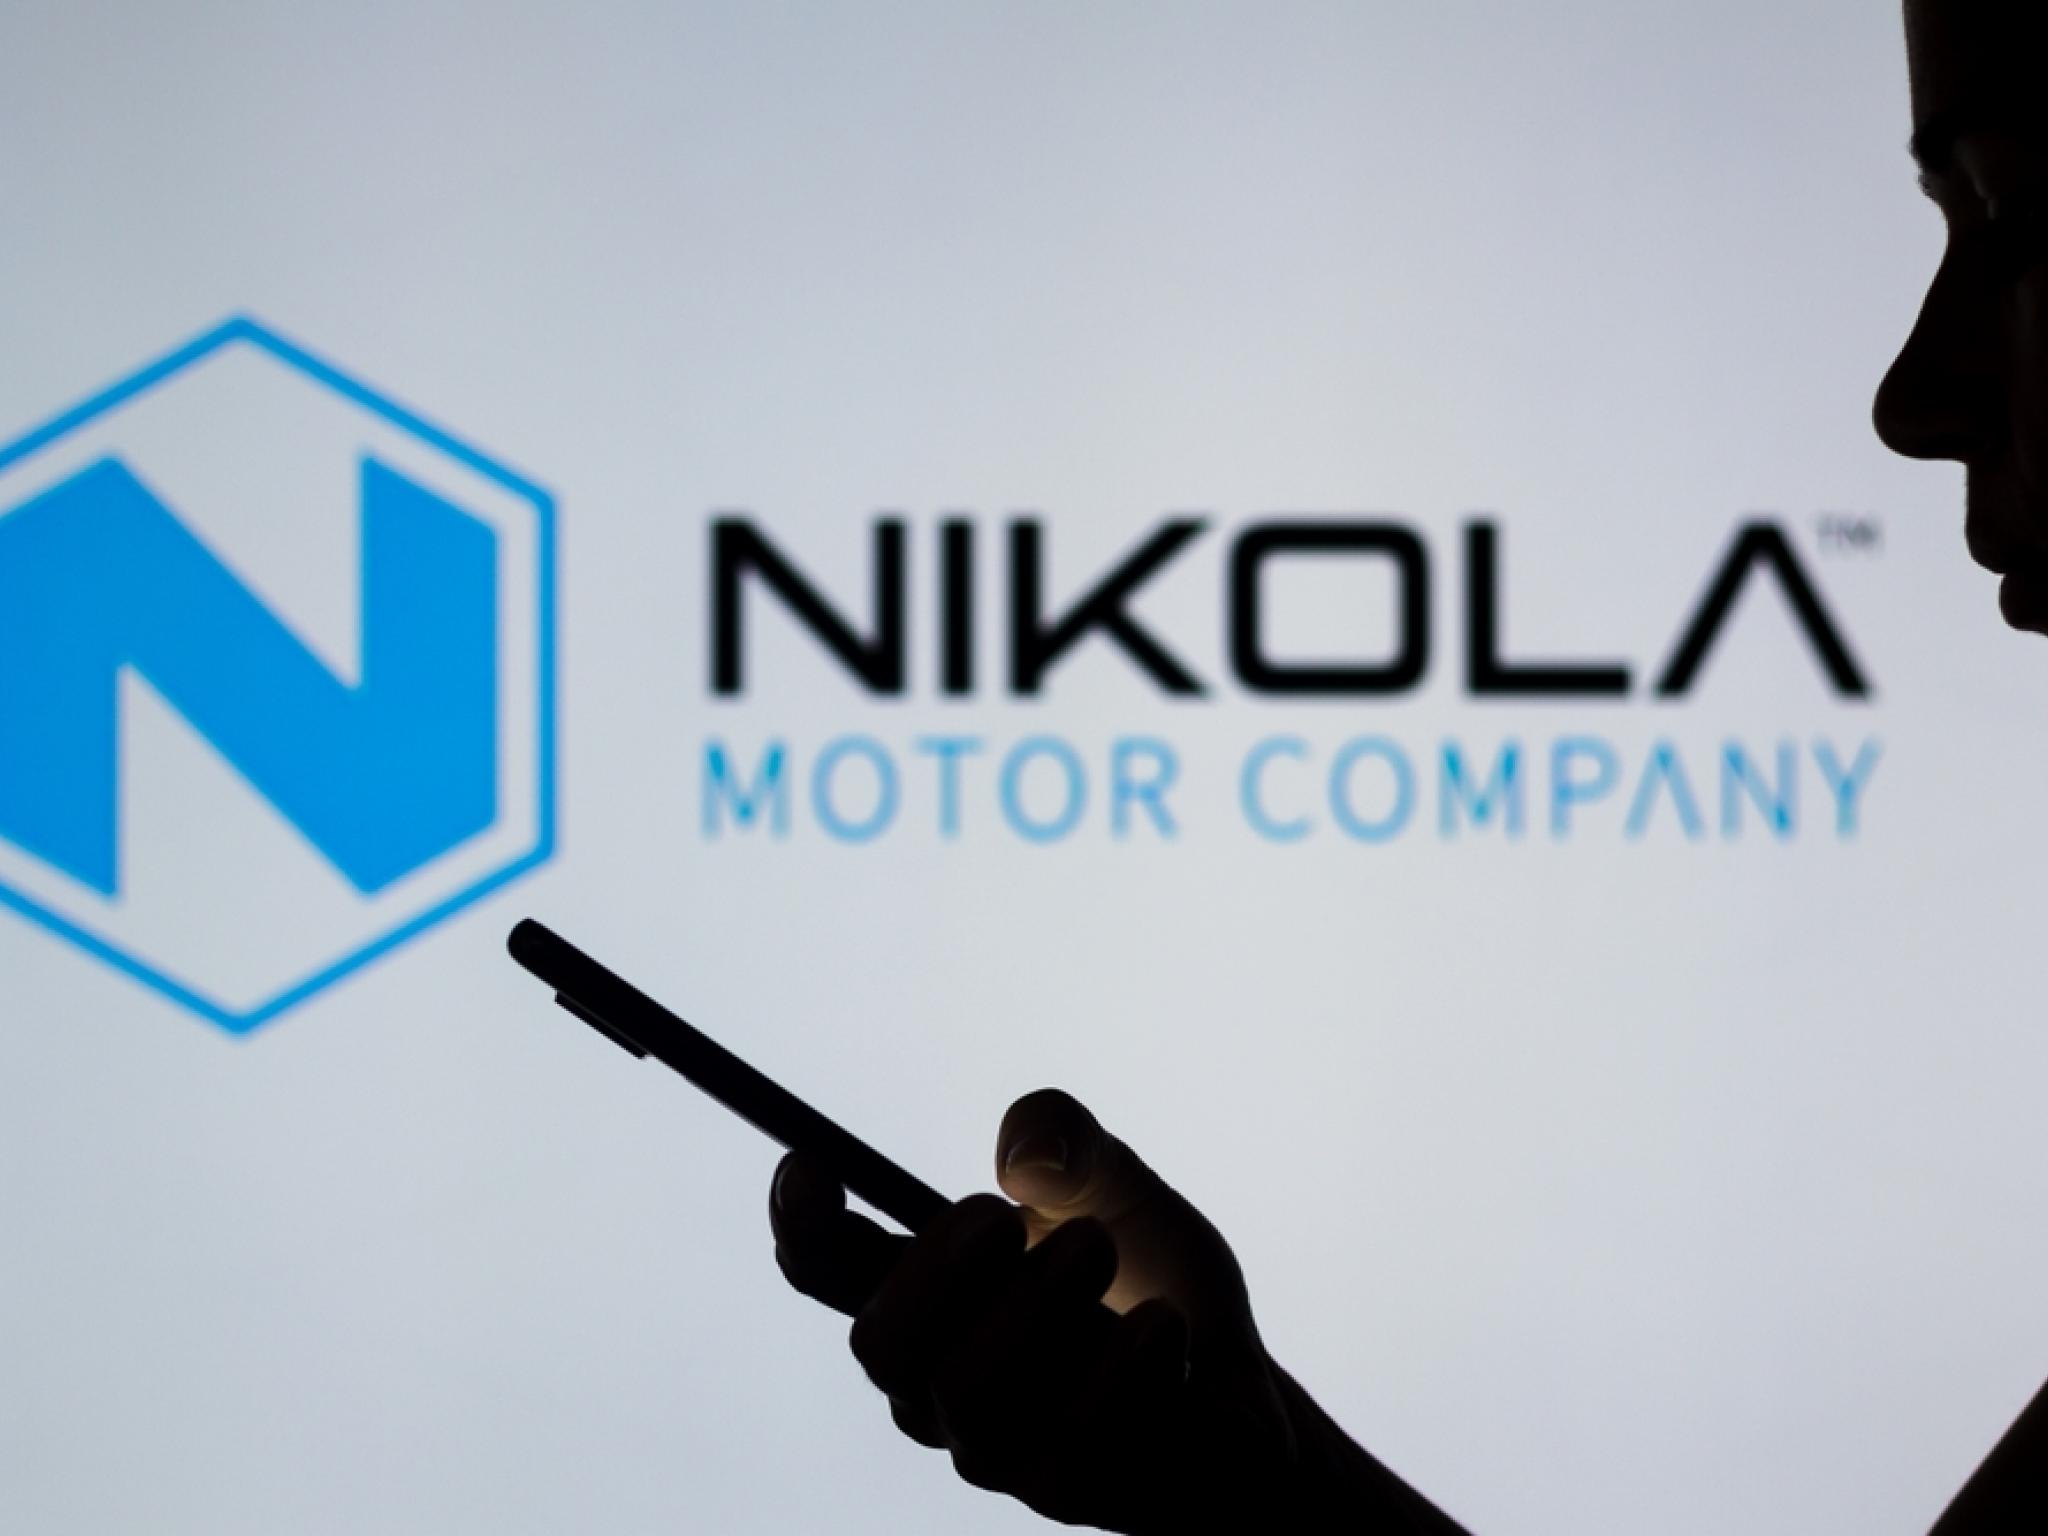  whats-going-on-with-nikola-stock-after-its-reverse-split 